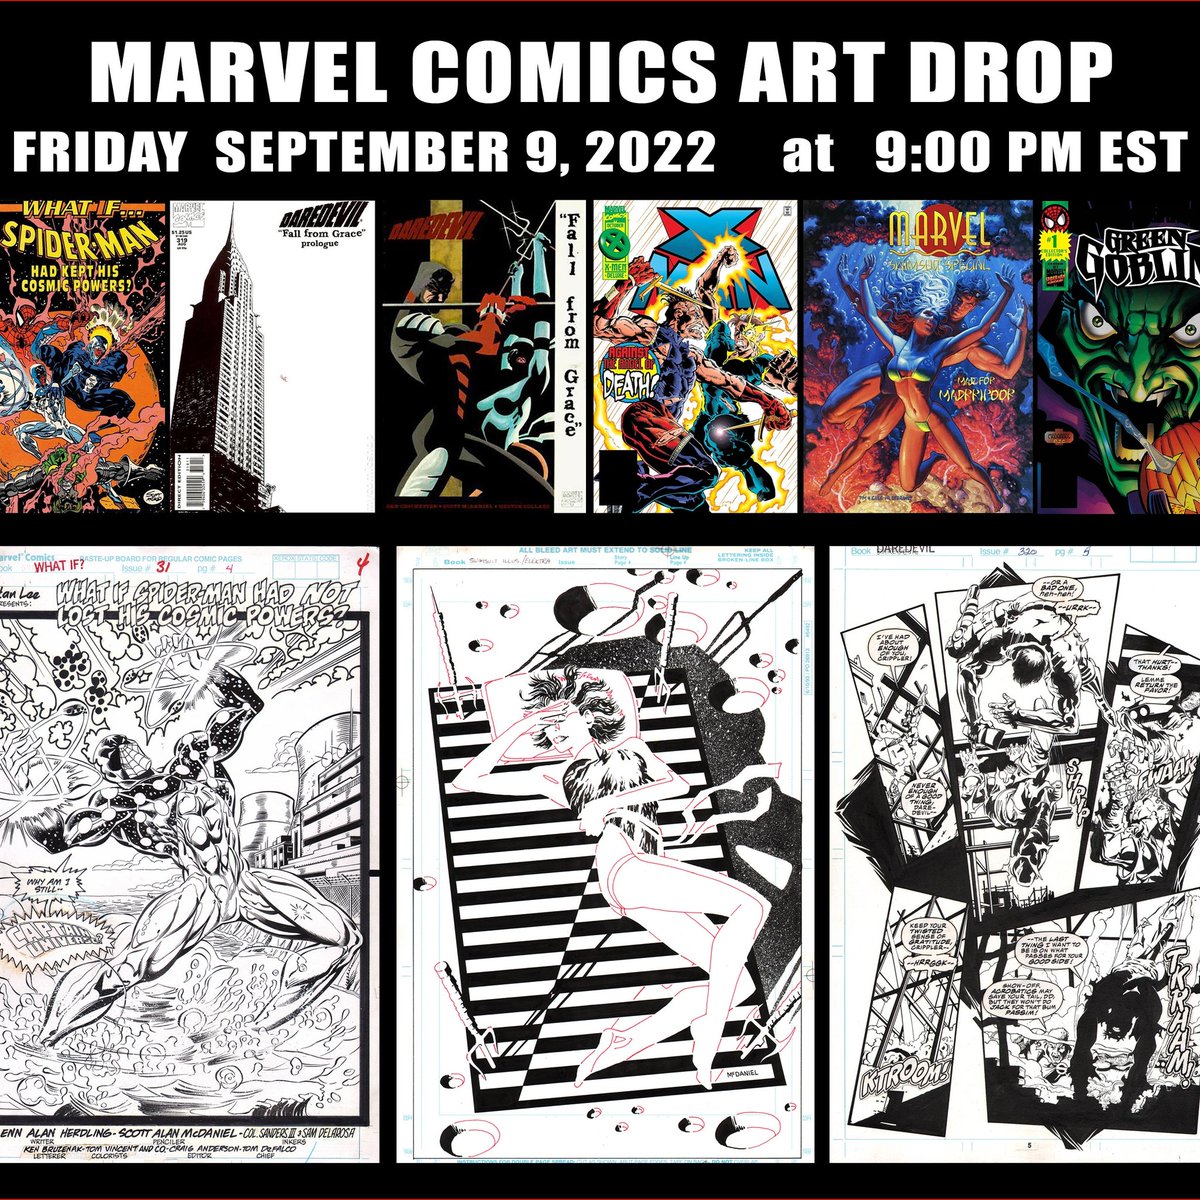 Note to art collectors: I’m releasing a large batch of original art from my early work at Marvel Comics on Friday, Sept 9 at 9 PM EST. Spider-Man, Daredevil, Elektra, Green Goblin. Hope to see you here: scottmcdaniel.net/artsale2/inter…